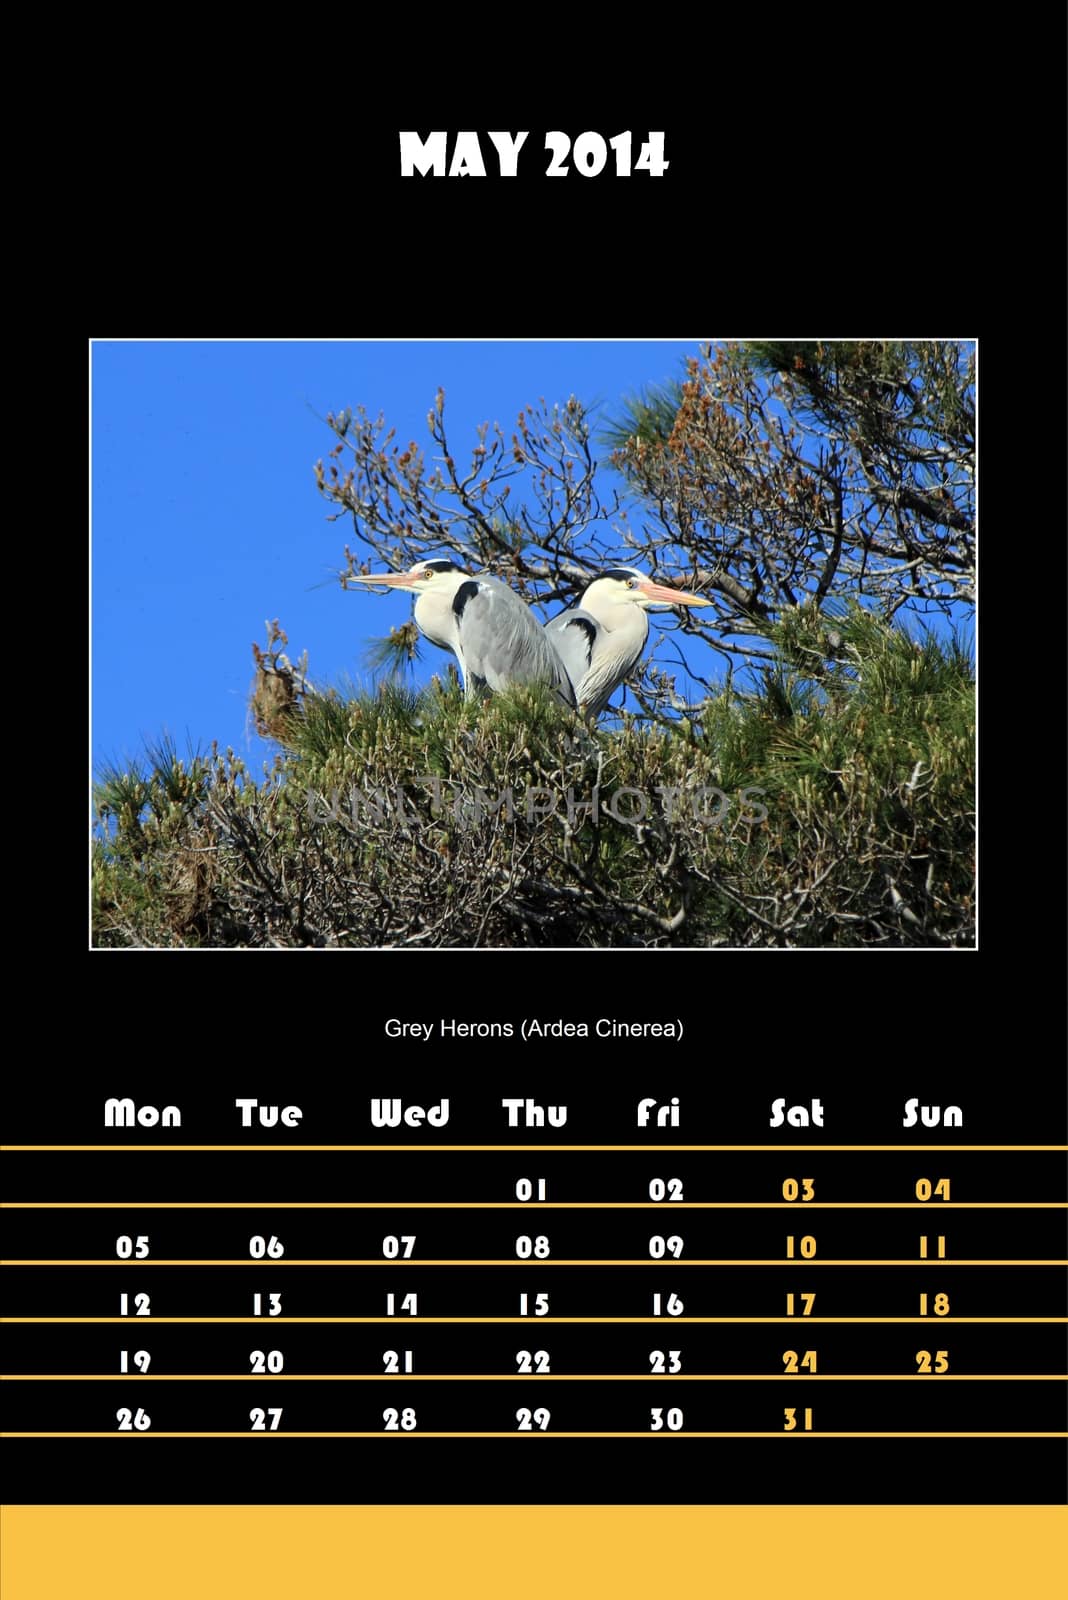 Colorful english bird calendar for may 2014 in black background, grey heron (ardea cinerea) picture